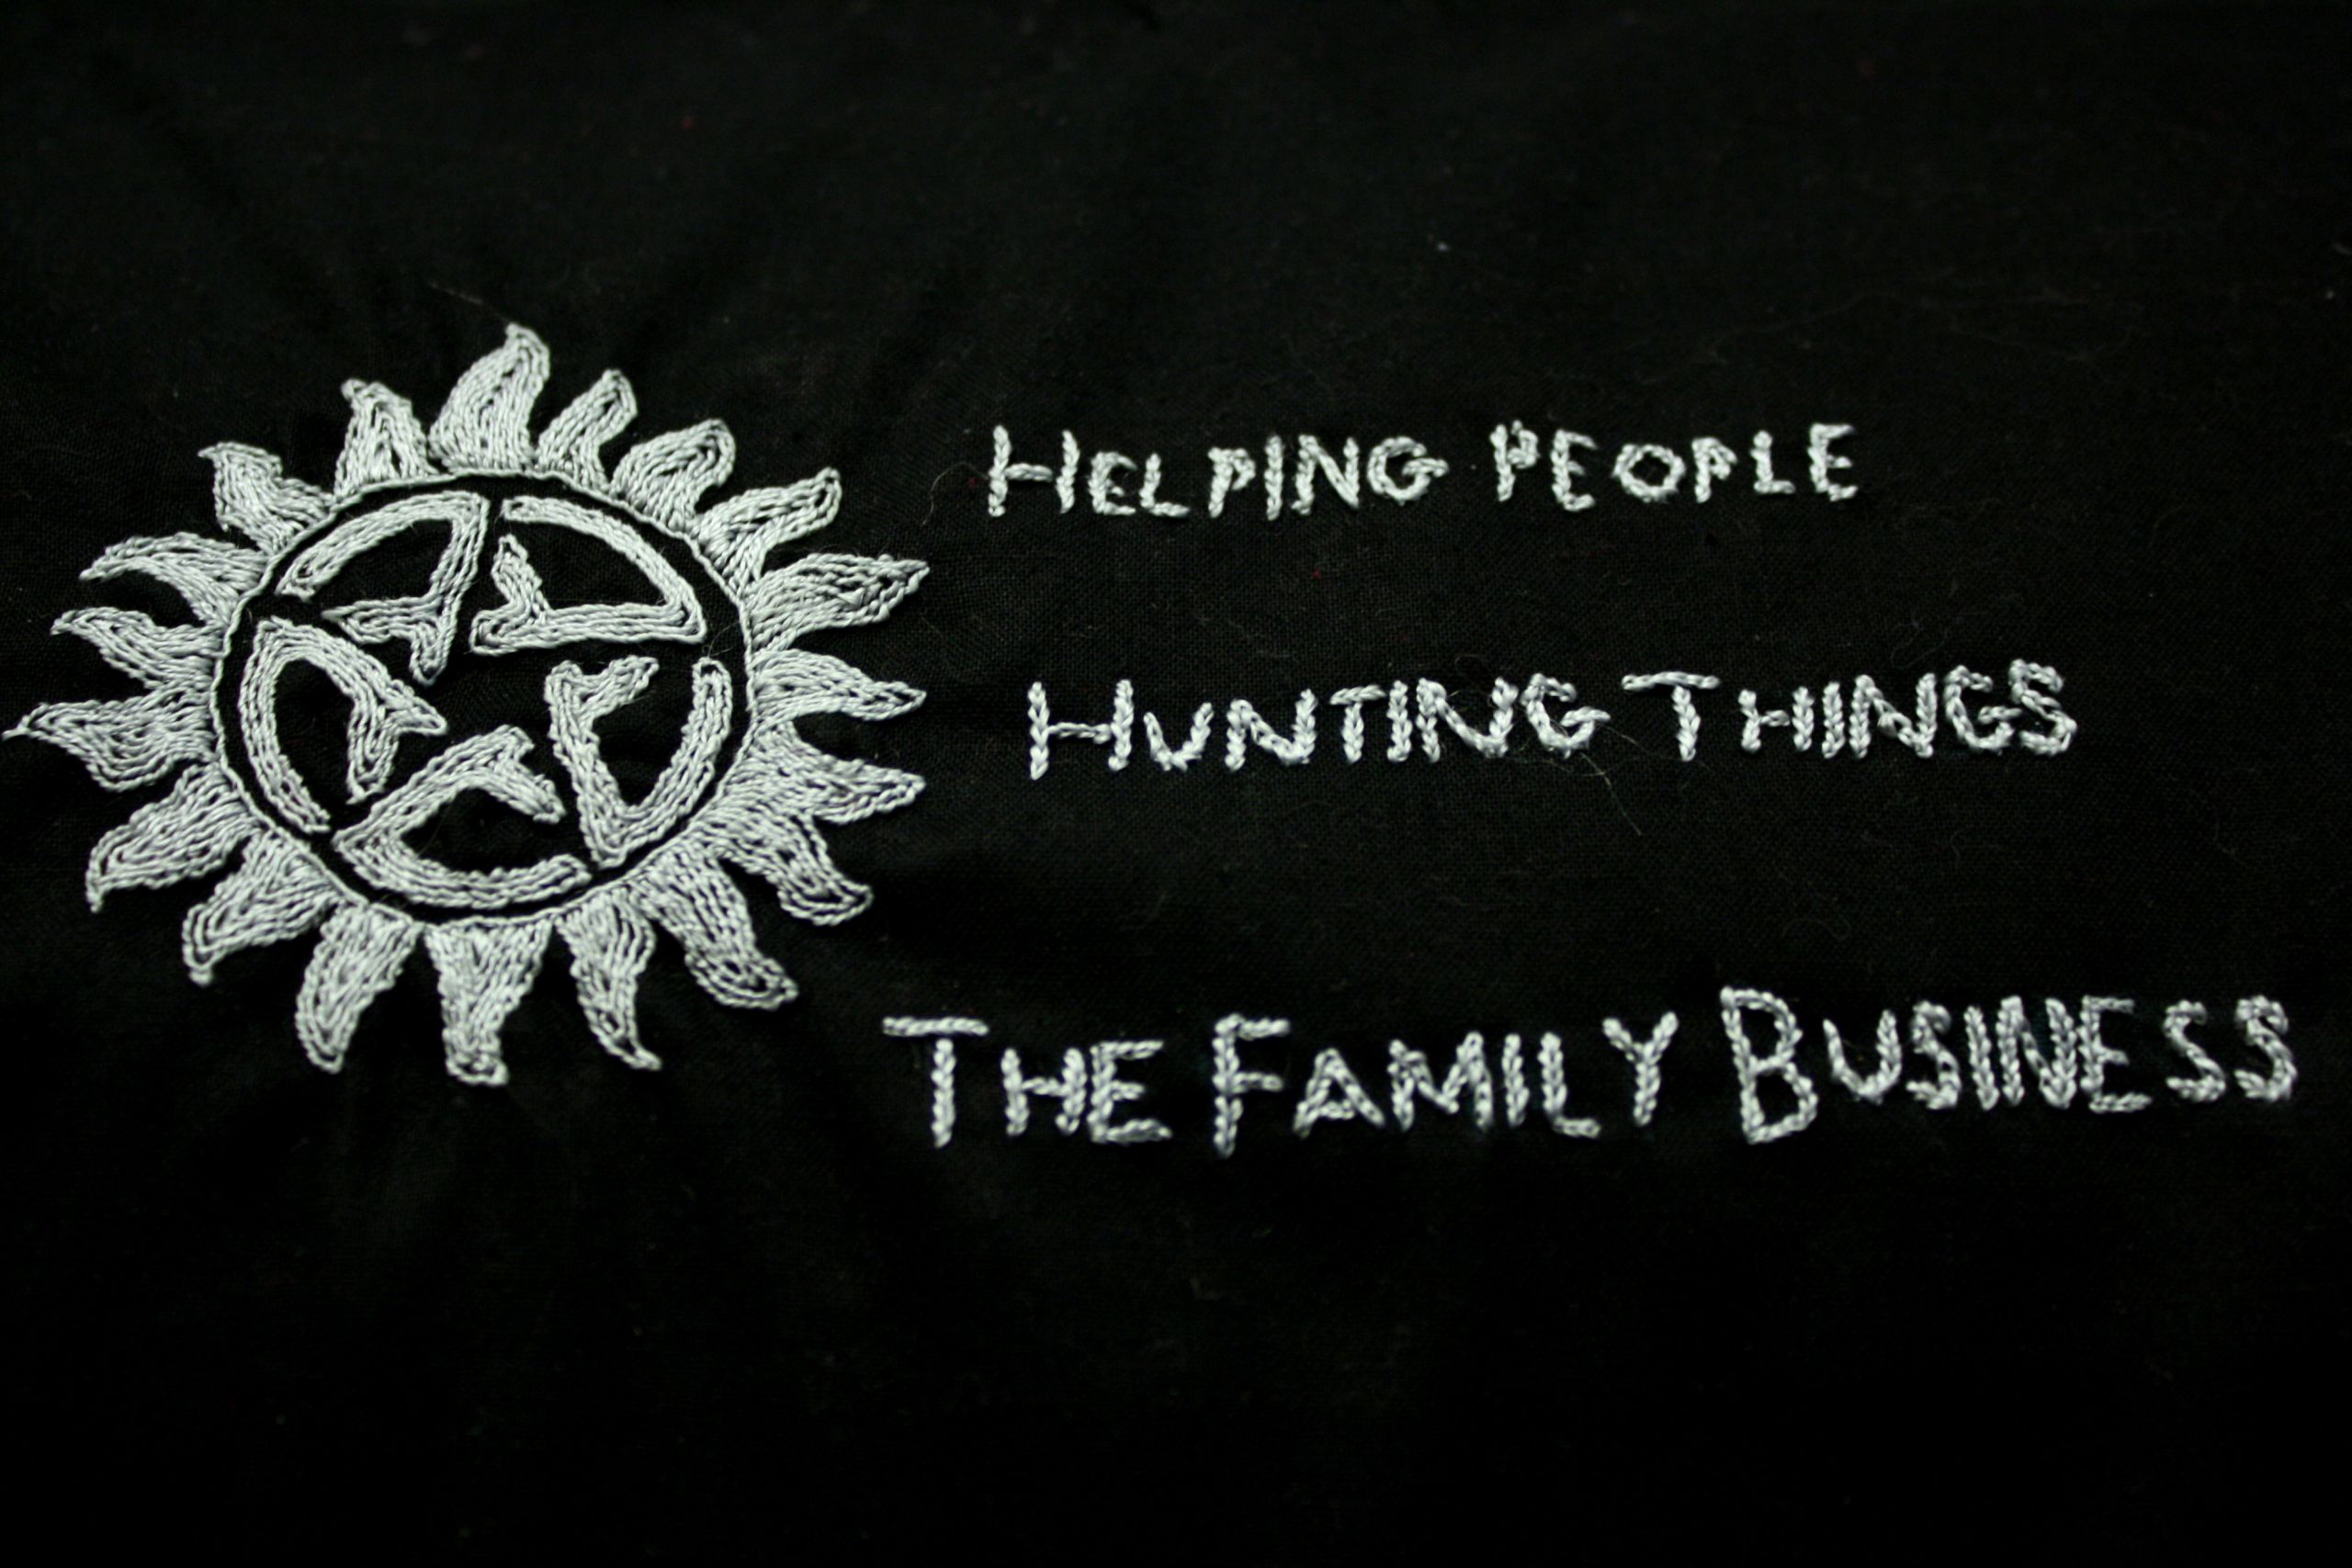 Supernatural Family Business Quote
 I don t Dean this season Supernatural